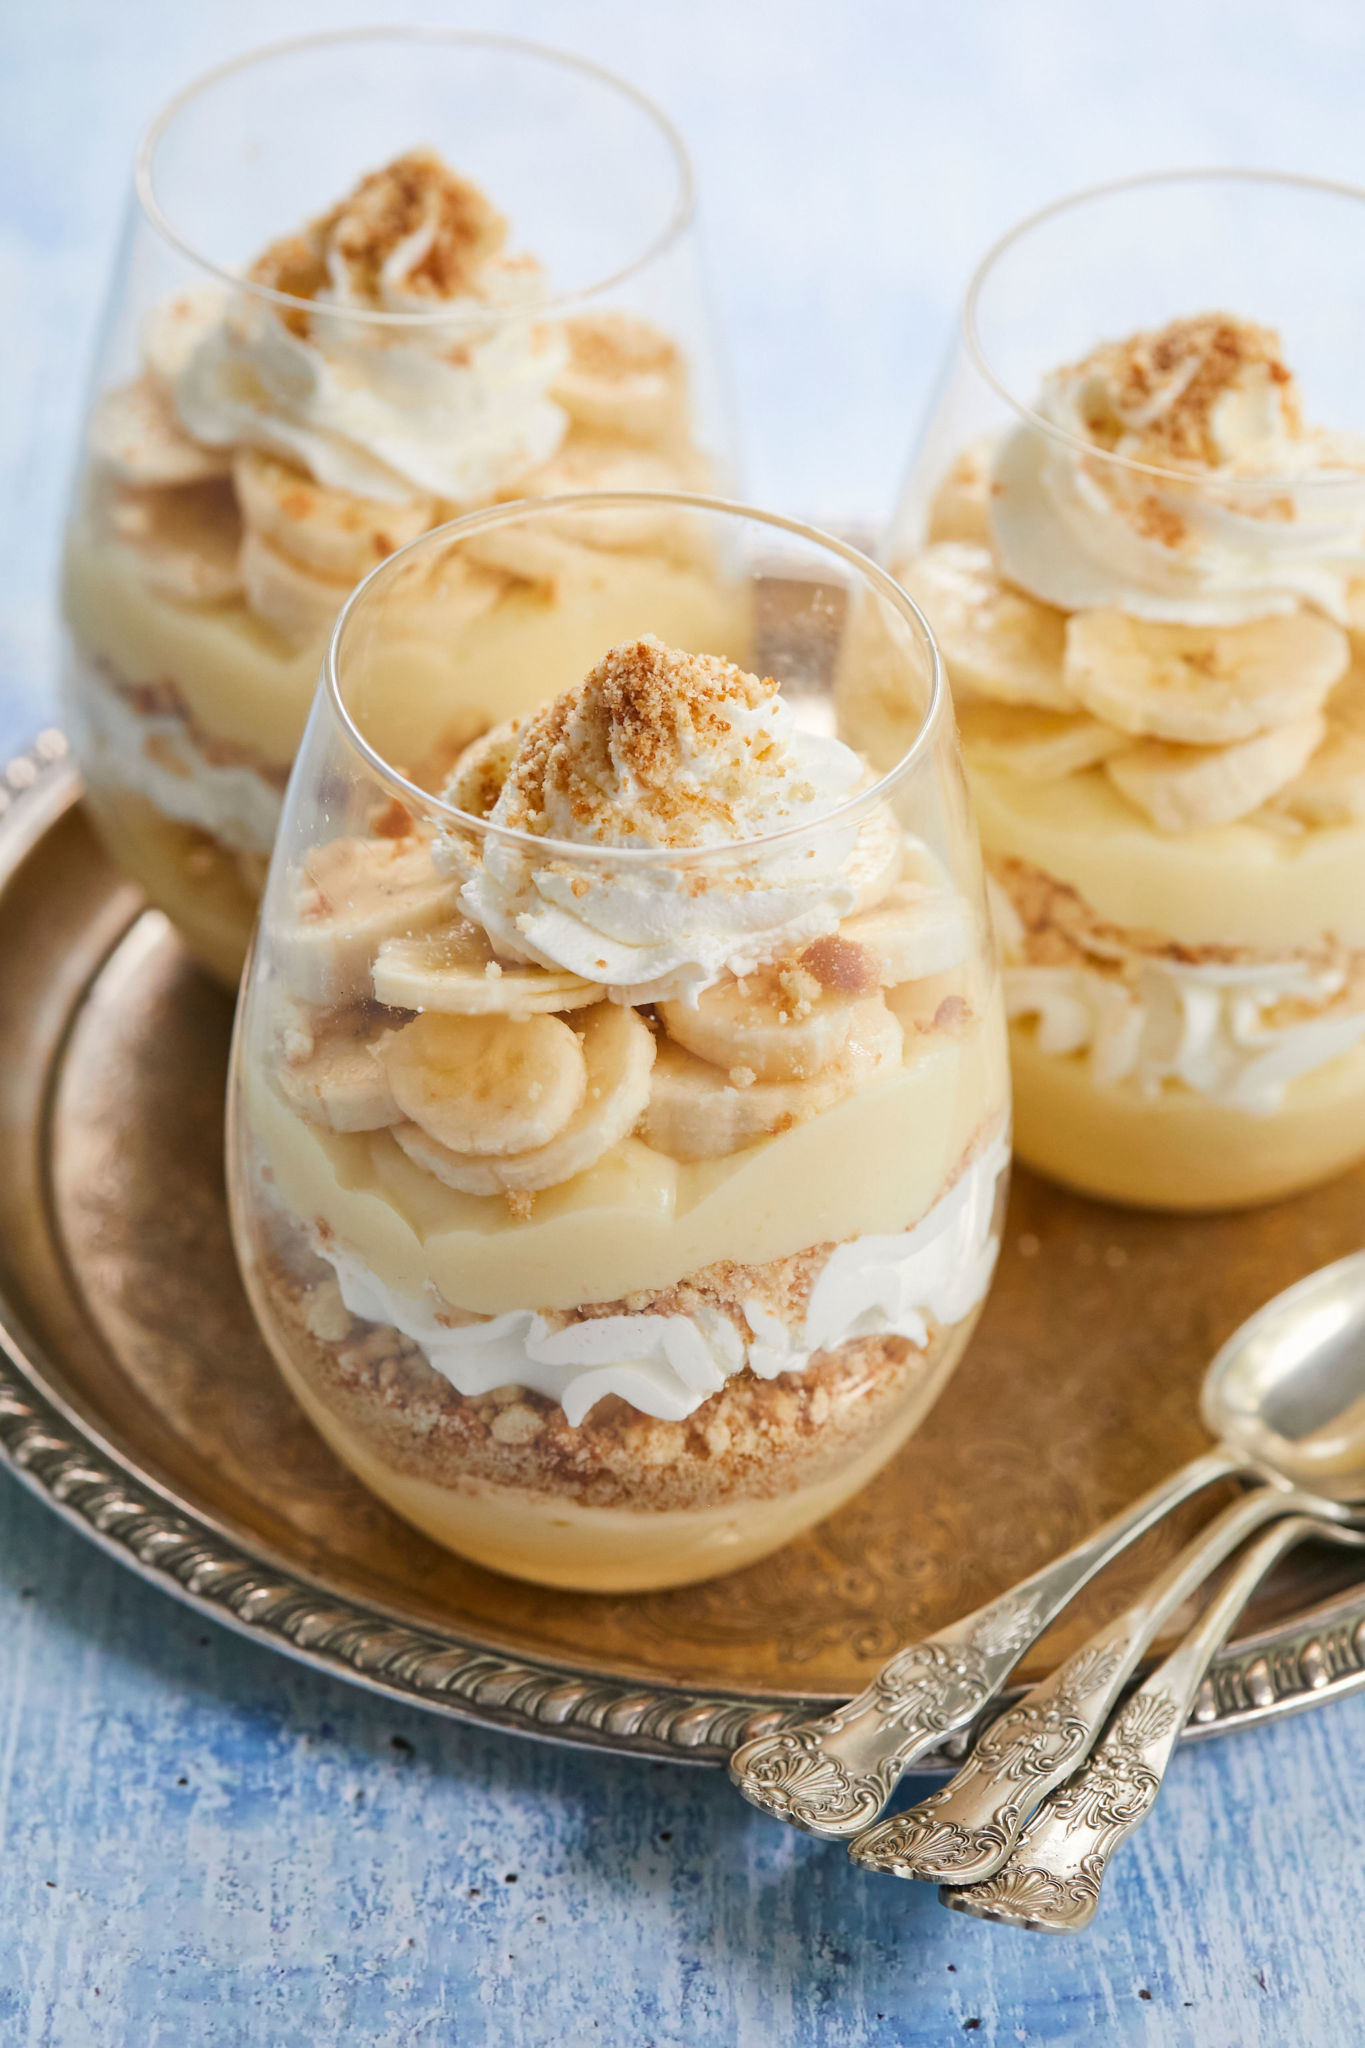 Three servings of my Banana Pudding recipe — in glasses instead of traditional serving dishes.